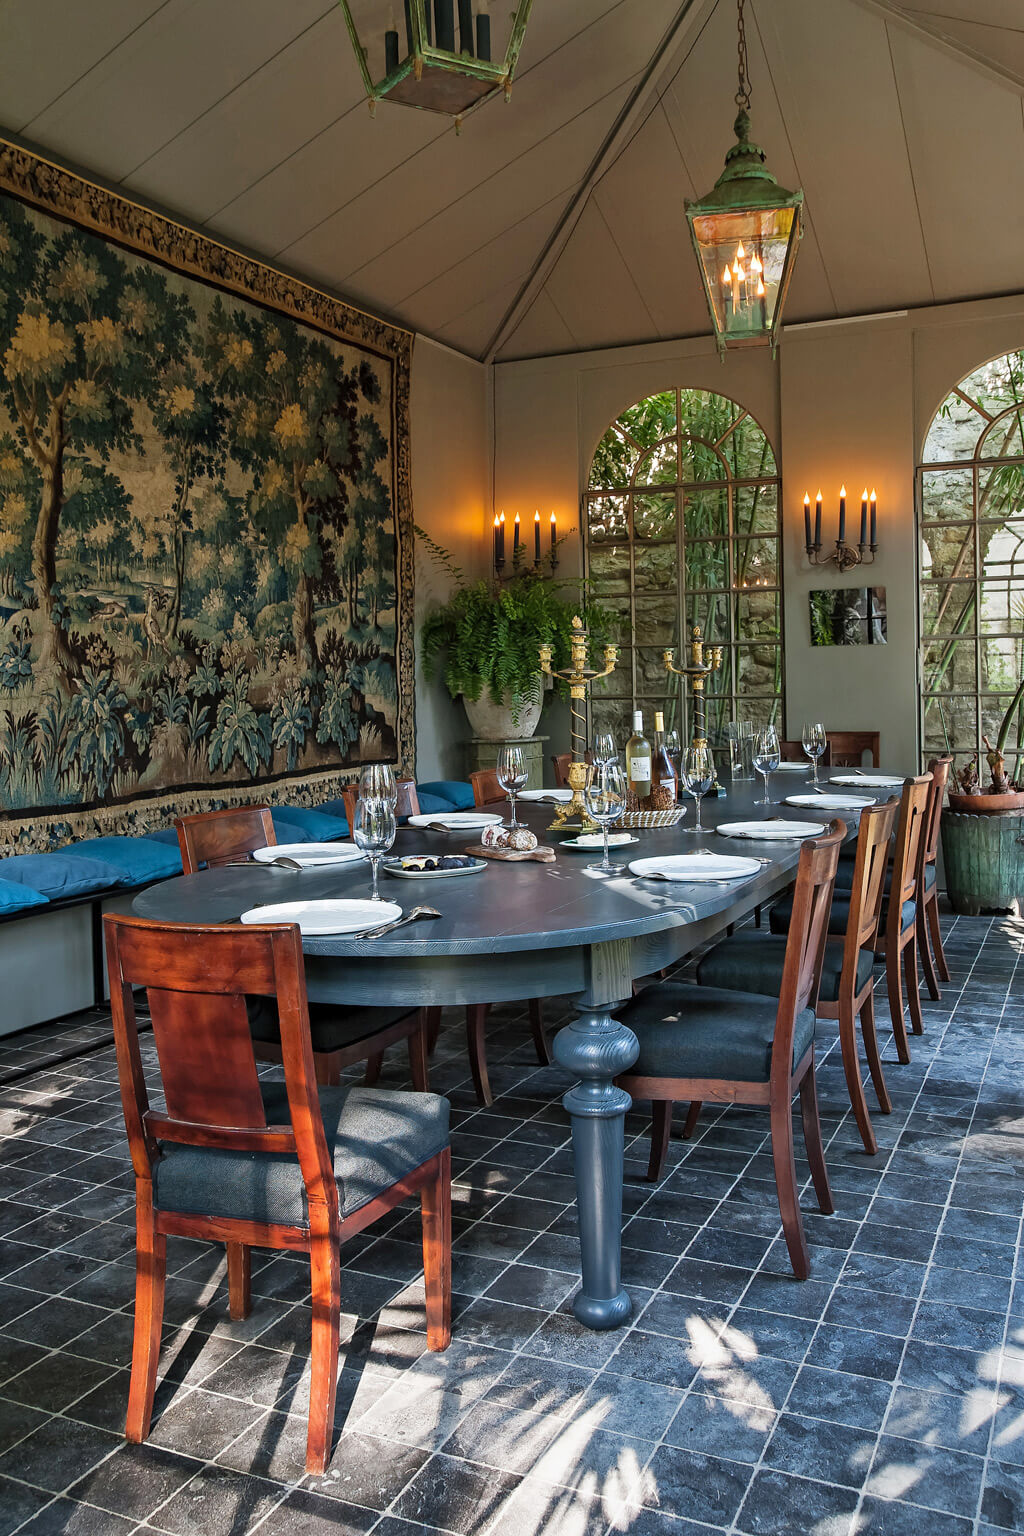 Orangerie dining room decorated with blue in Provence. Come see a Breathtaking French Château Tour in Provence With Photo Gallery of Historical Architecture, Dramatic Eclectic Interiors & Oddities!